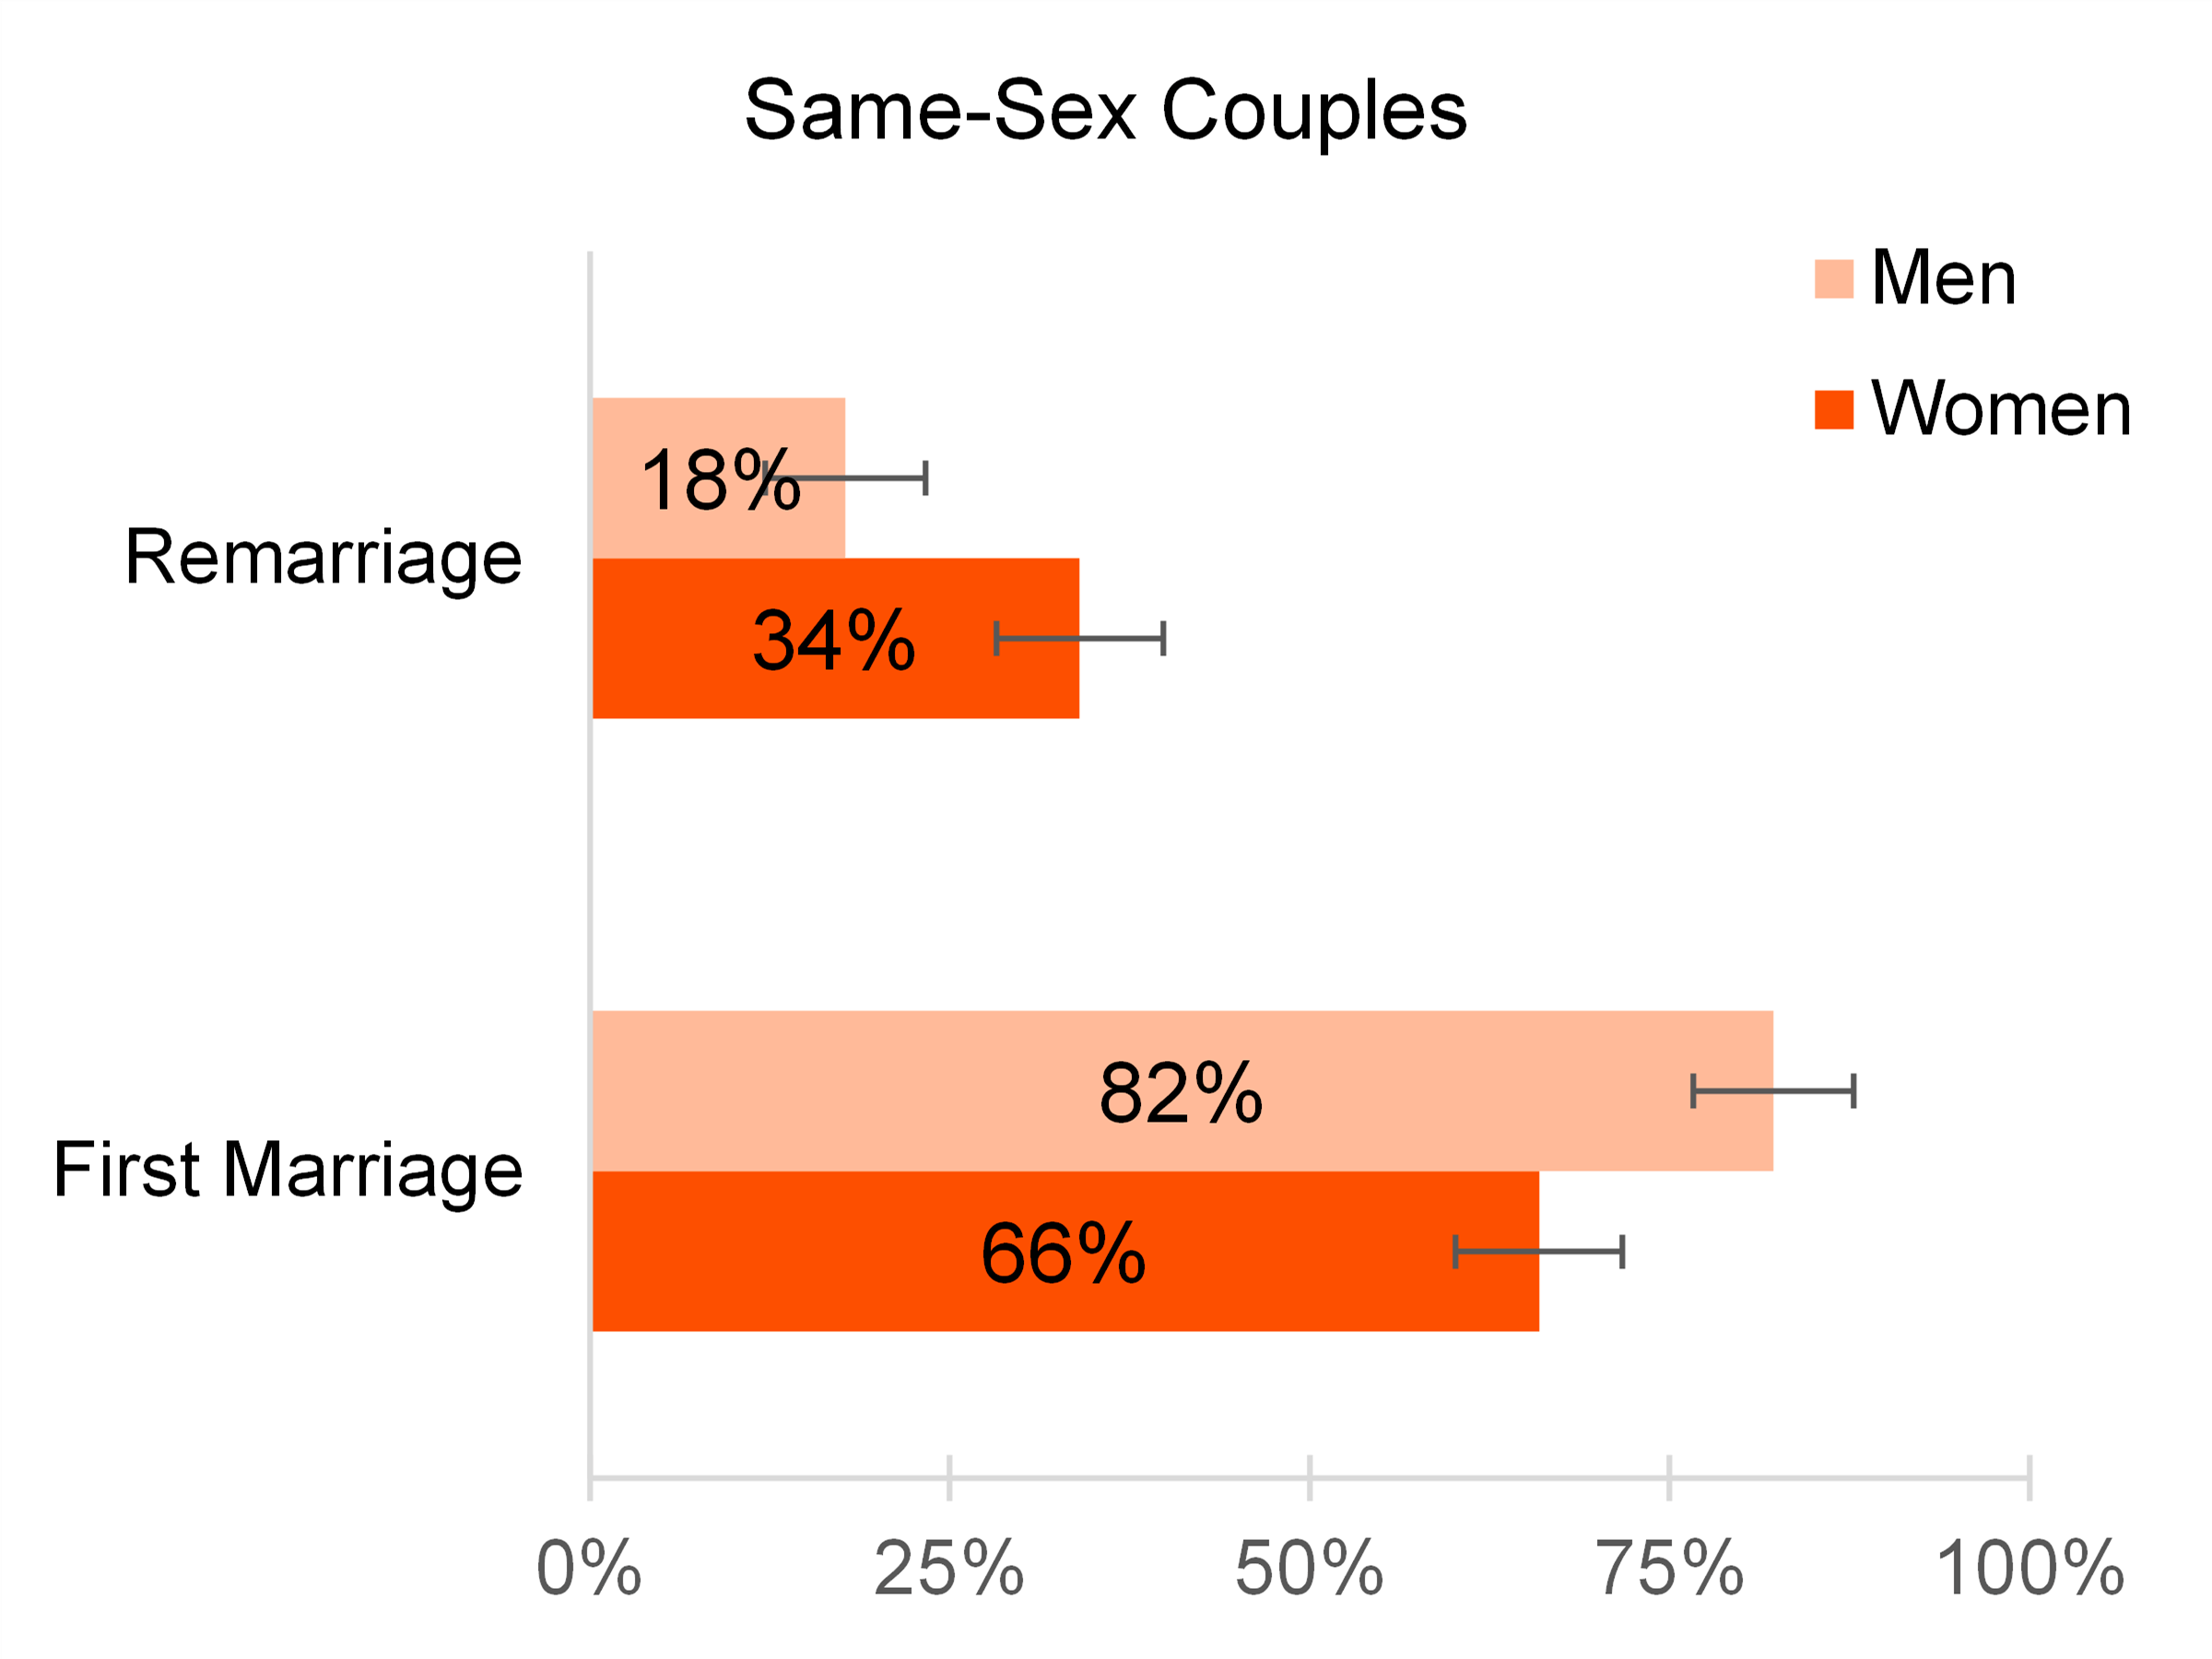 Graph showing Figure 2. First Marriage and Remarriage for Same-Sex Couples, 2022